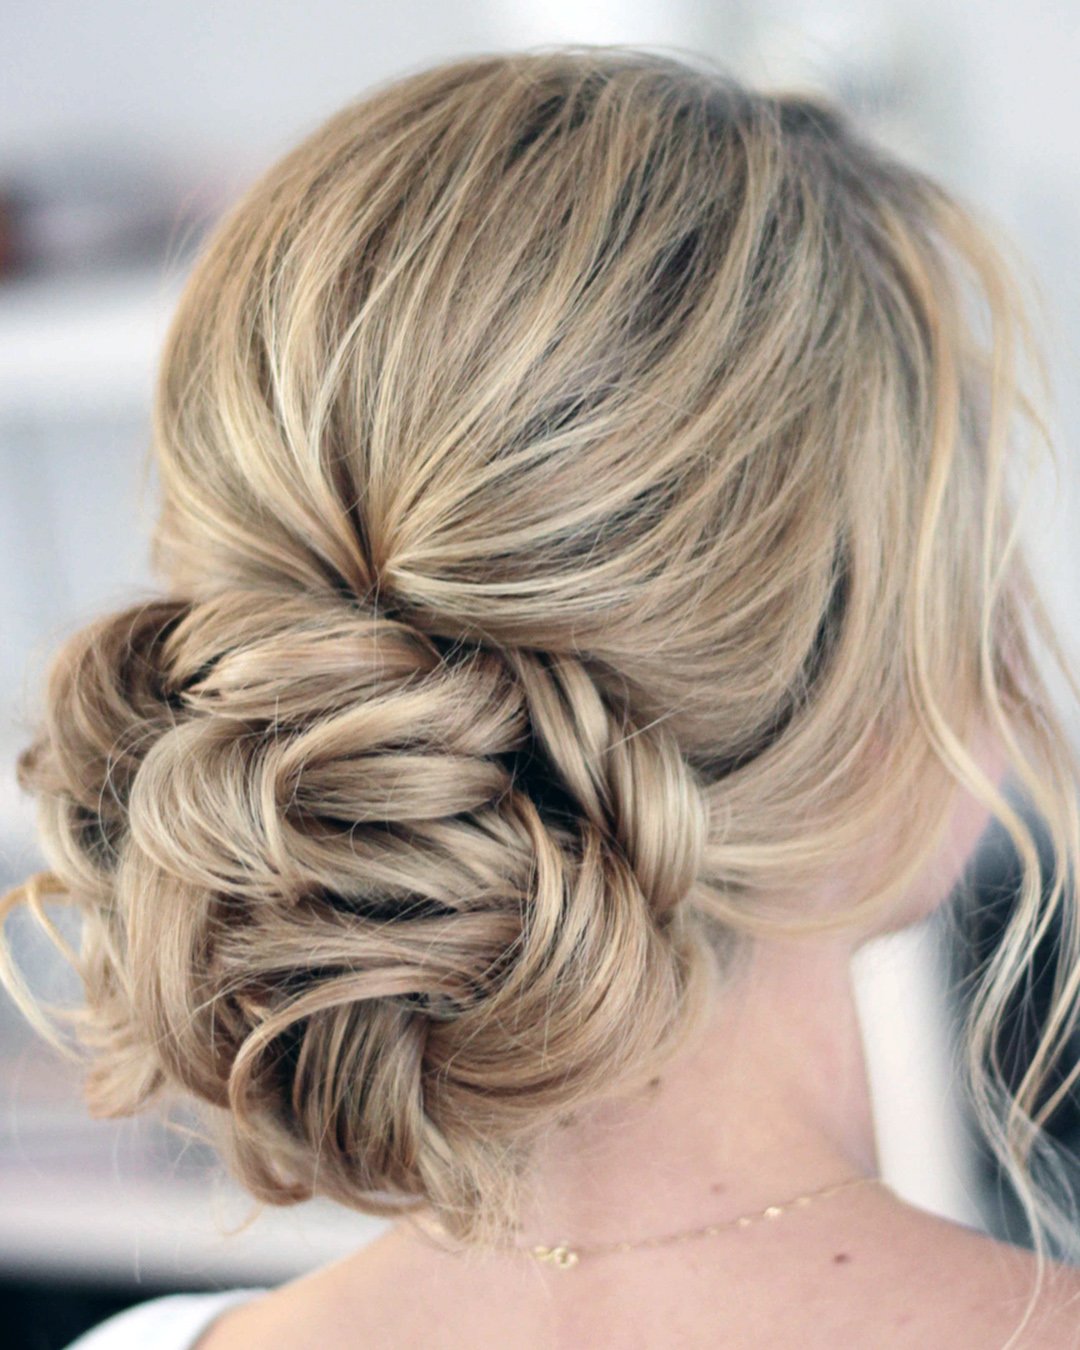 Bridesmaid Hairstyles Textured Updo Swept With Loose Curls 